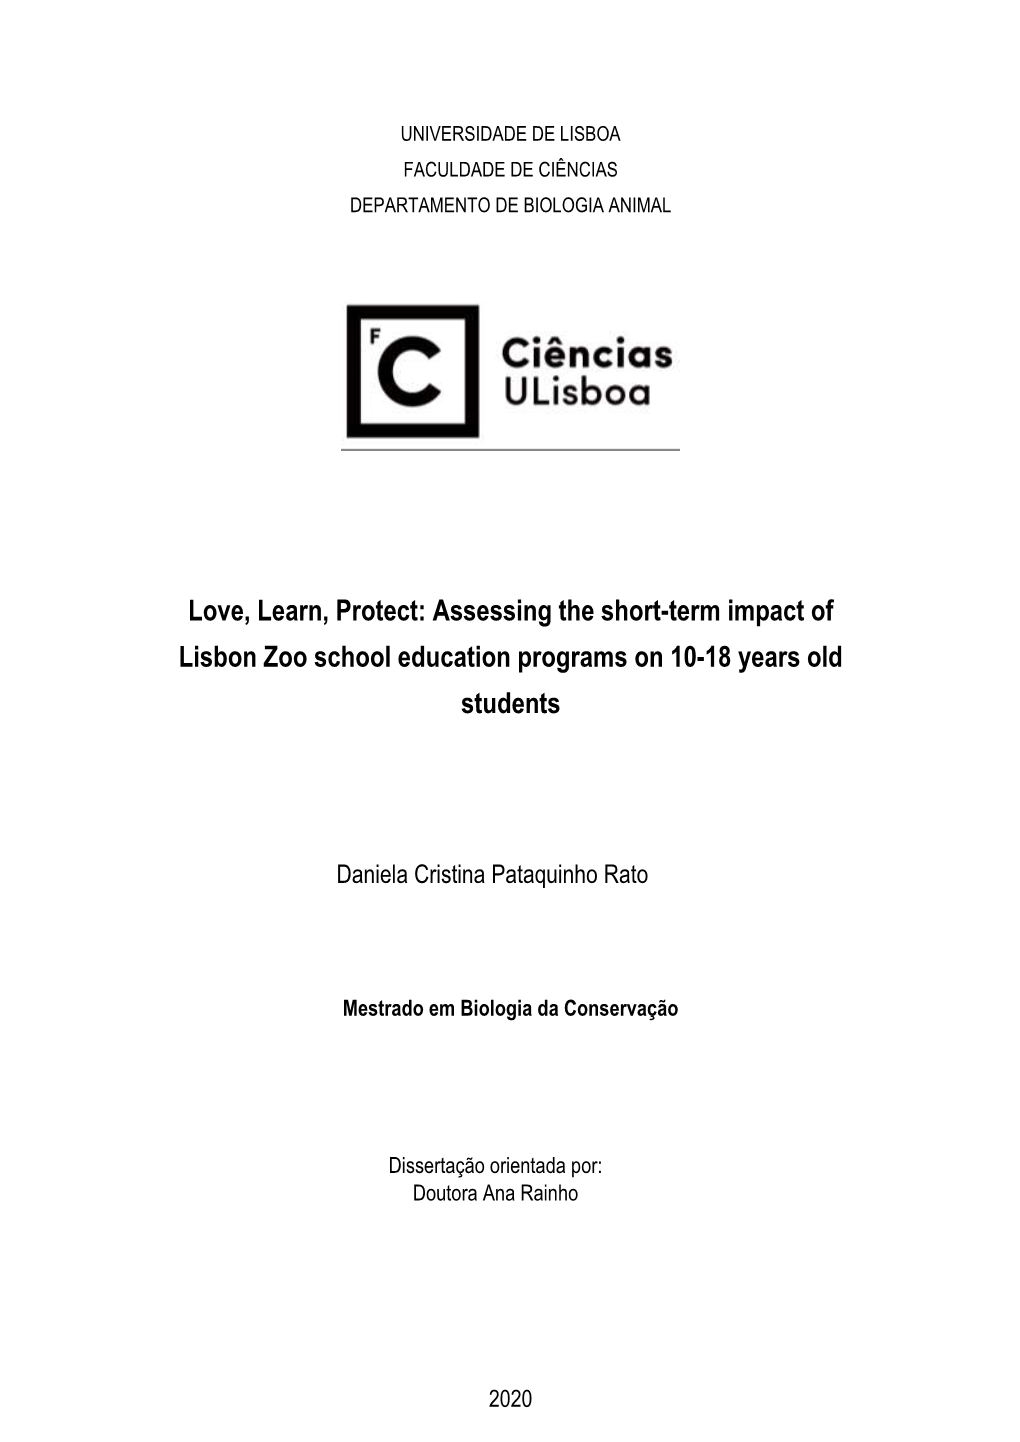 Assessing the Short-Term Impact of Lisbon Zoo School Education Programs on 10-18 Years Old Students